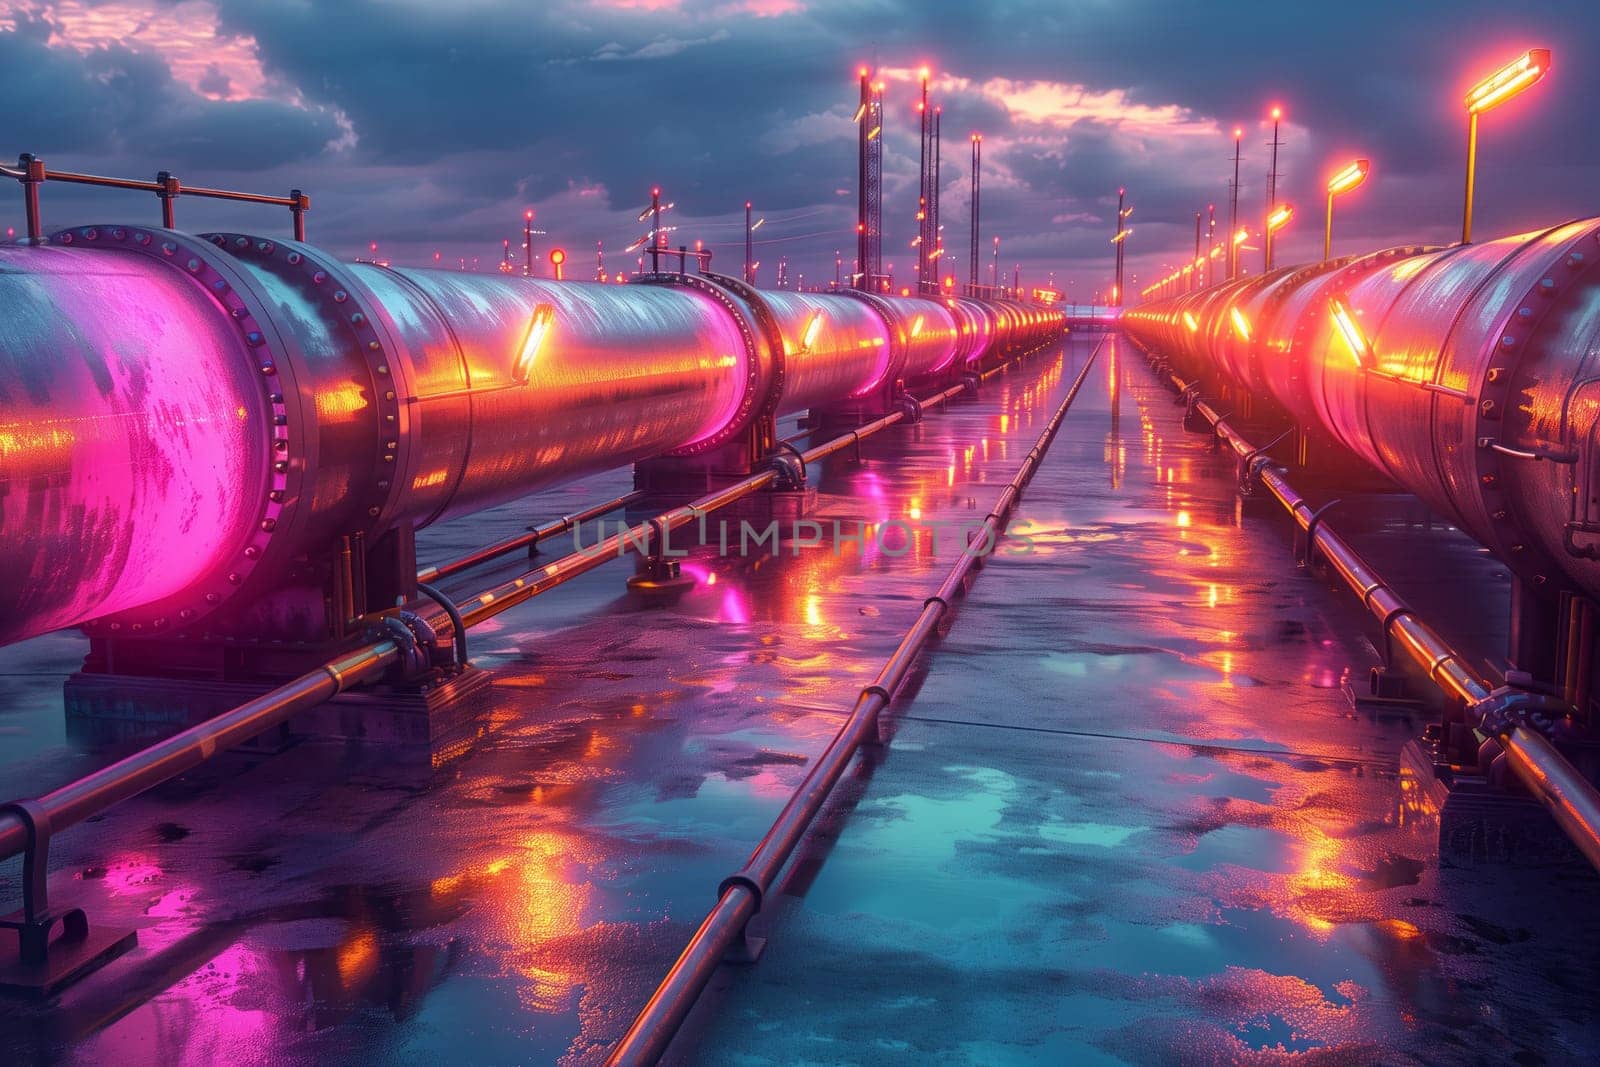 A row of pipes lining a bridge at night under a magenta sky by richwolf